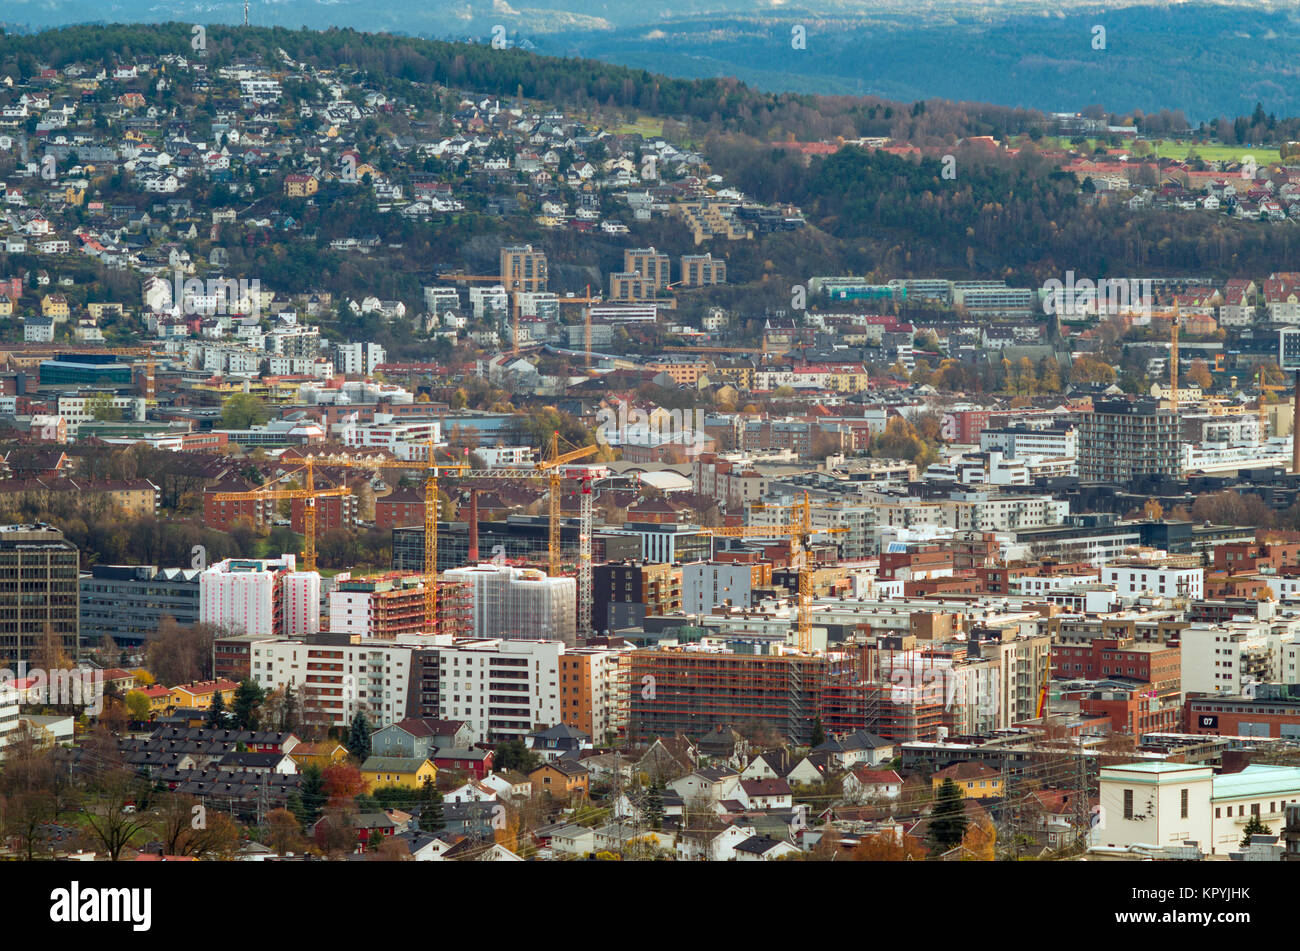 General, long distance, aerial view of Loren, fast growing residential part of Oslo, full of new real estate  investition, building sites and cranes. Stock Photo